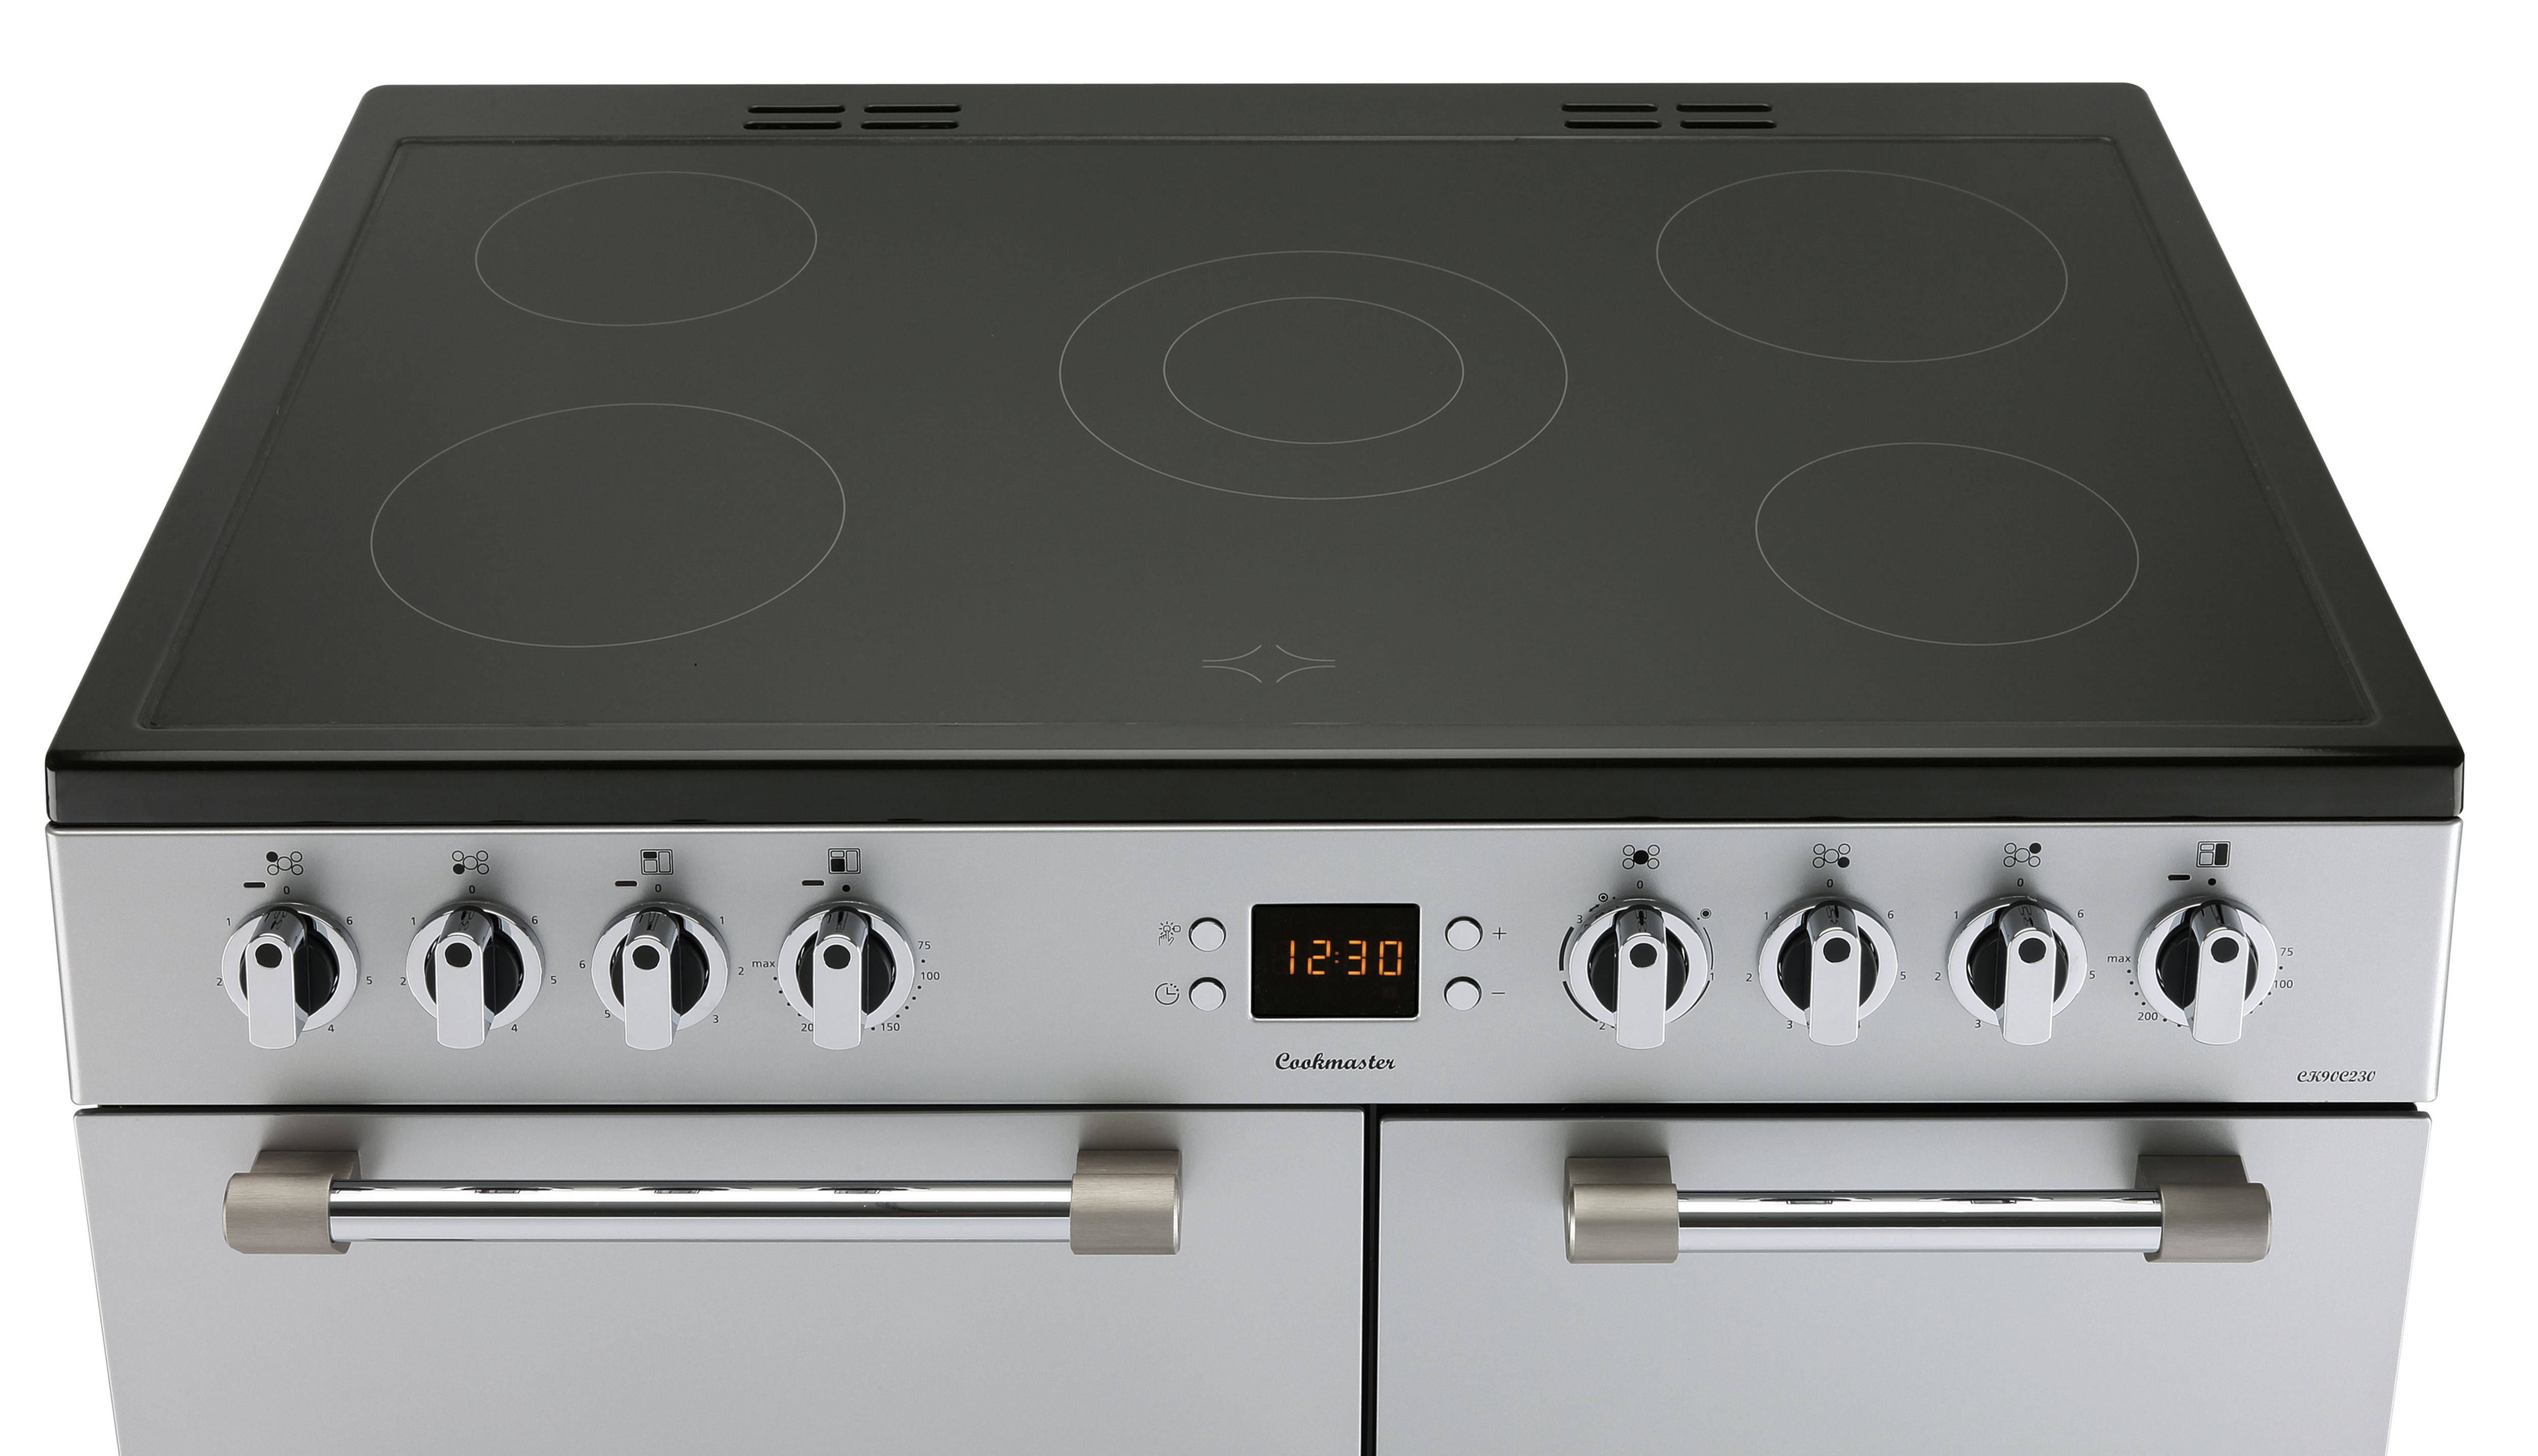 Leisure CK90C230S Freestanding Electric Range cooker with Electric Hob